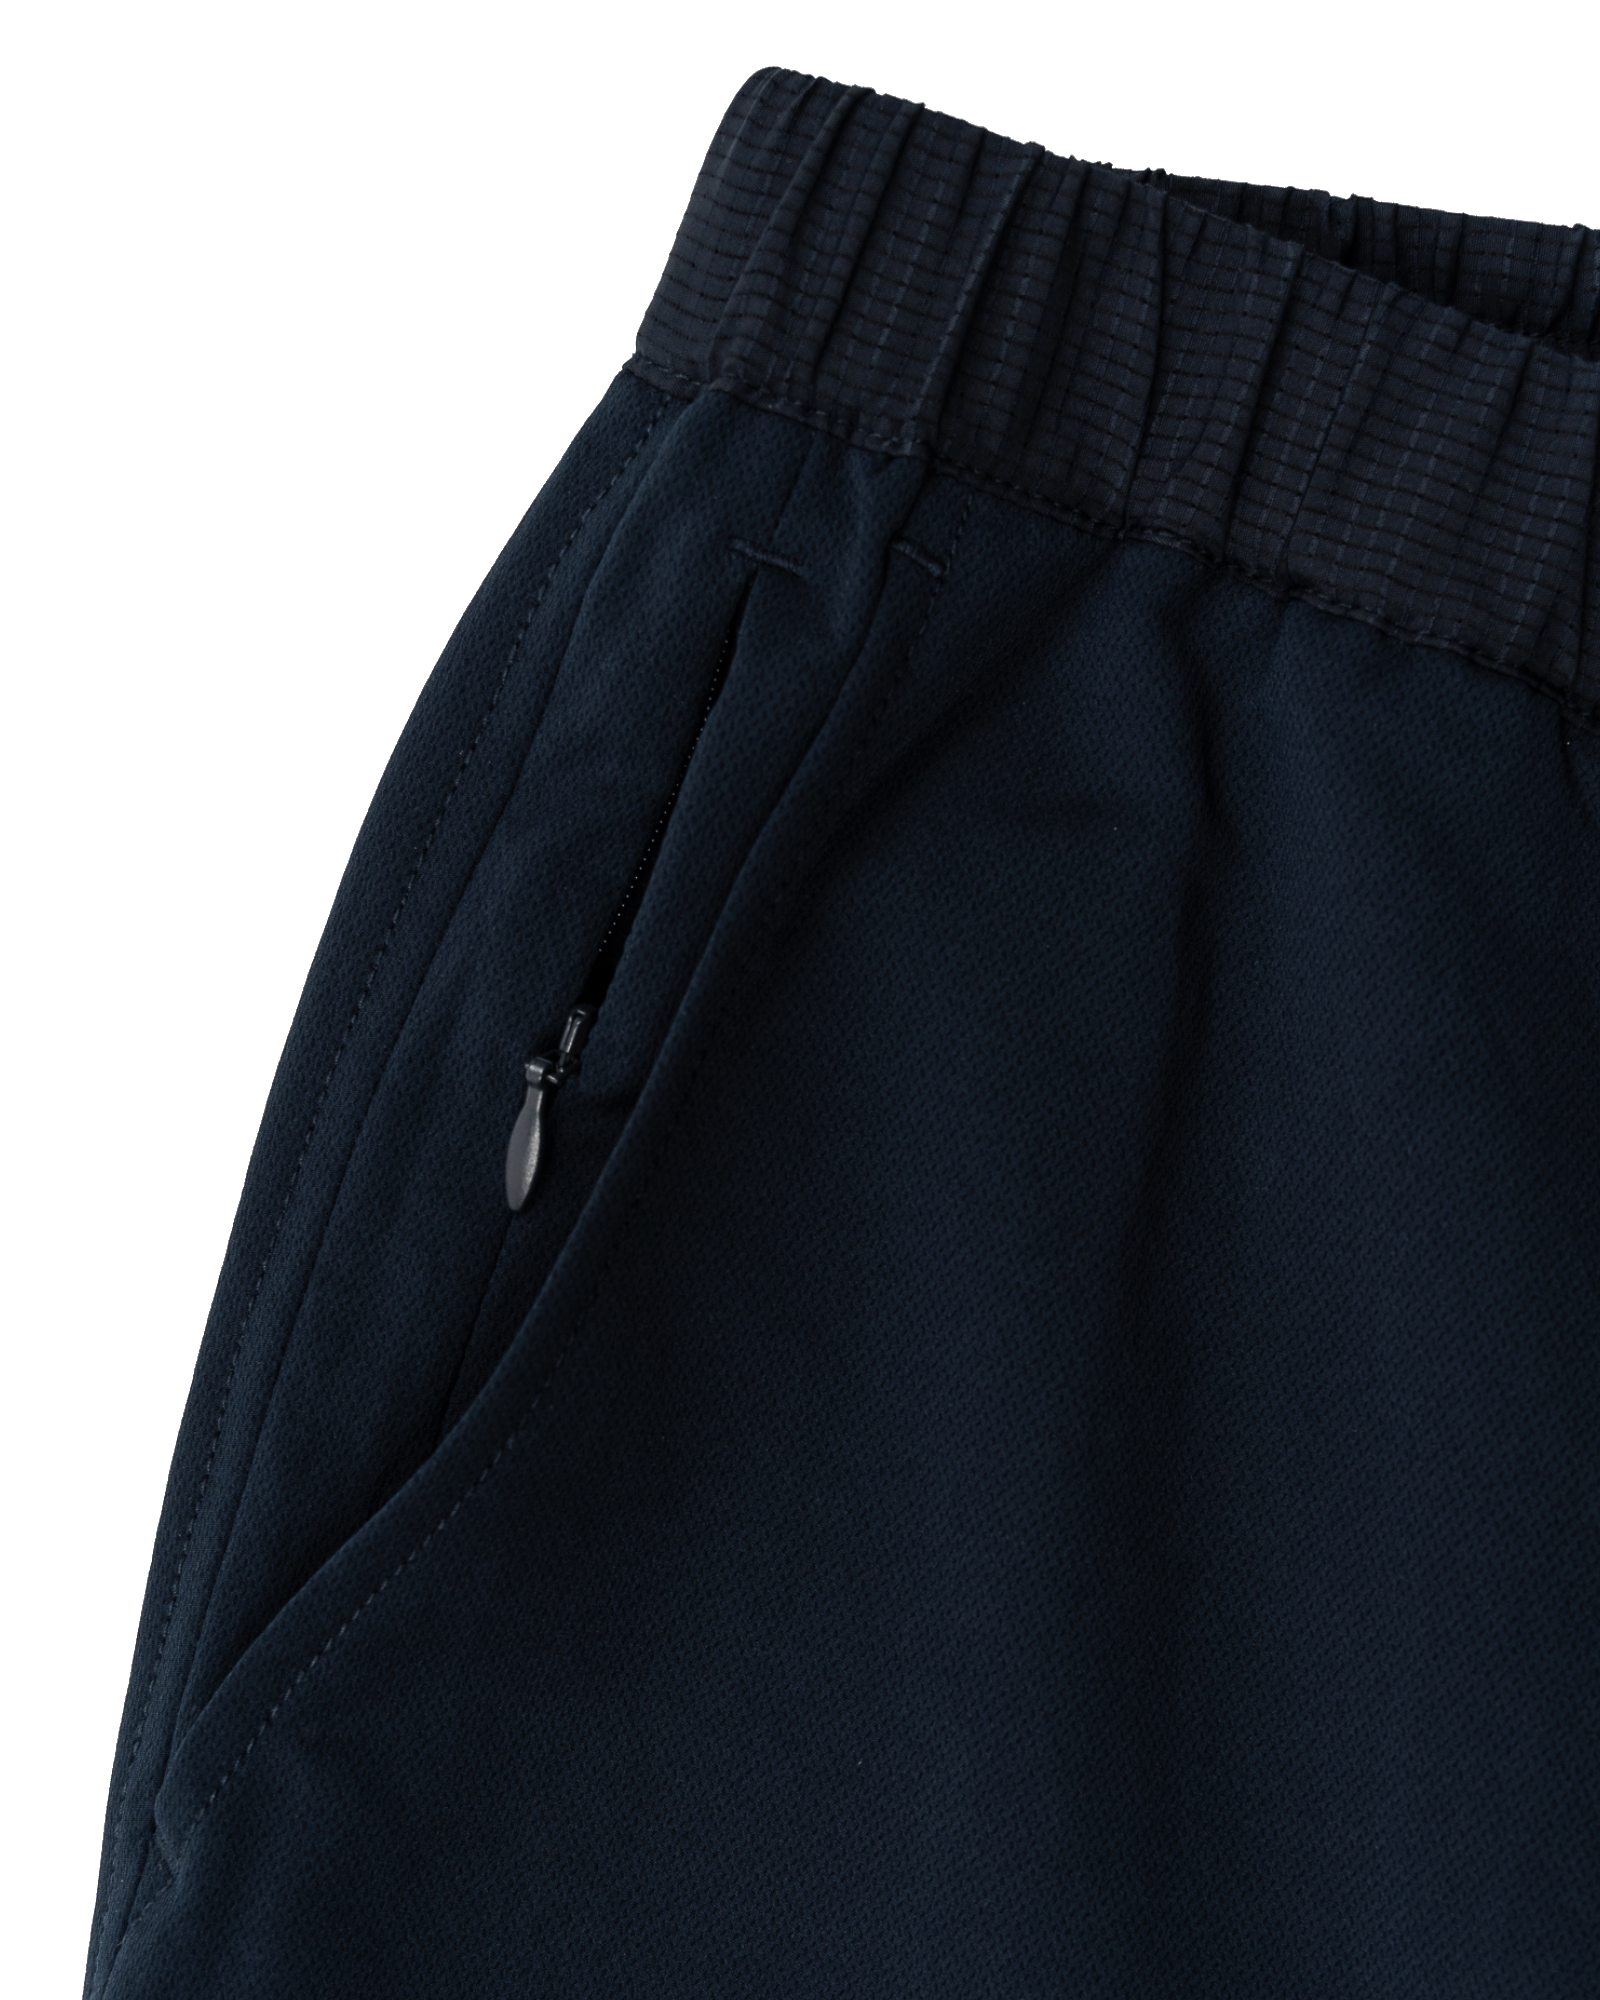 nanamica - Pant - Alphadry® - Wide Easy Pant - Navy